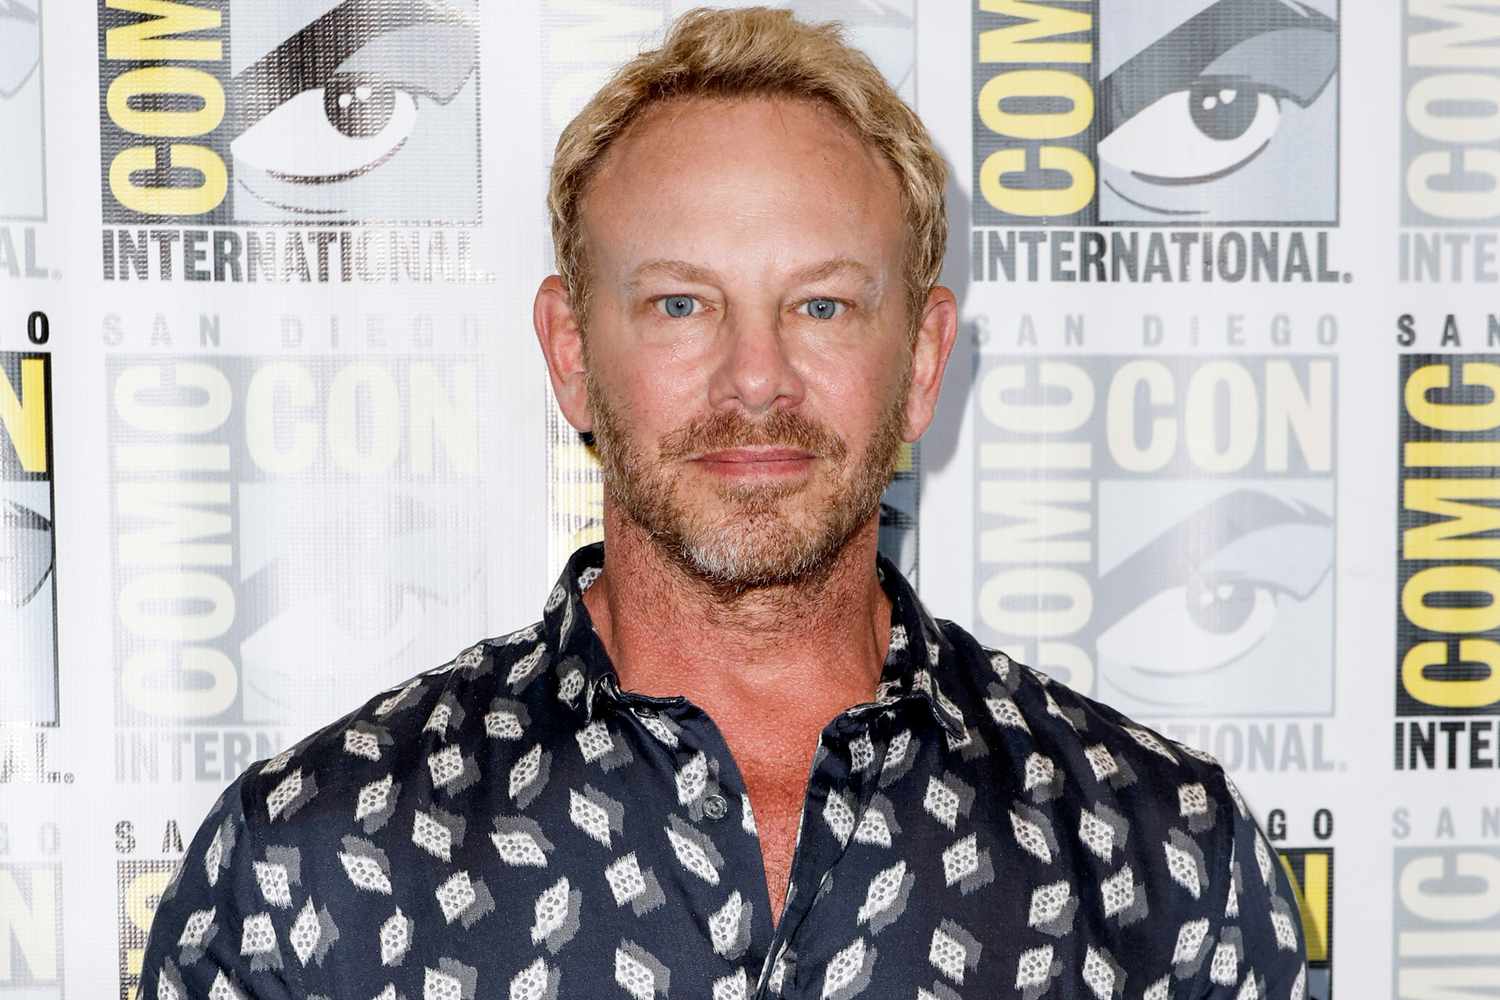 Ian Ziering Spotted In ‘Good Vibes’ Hat After Biker Brawl